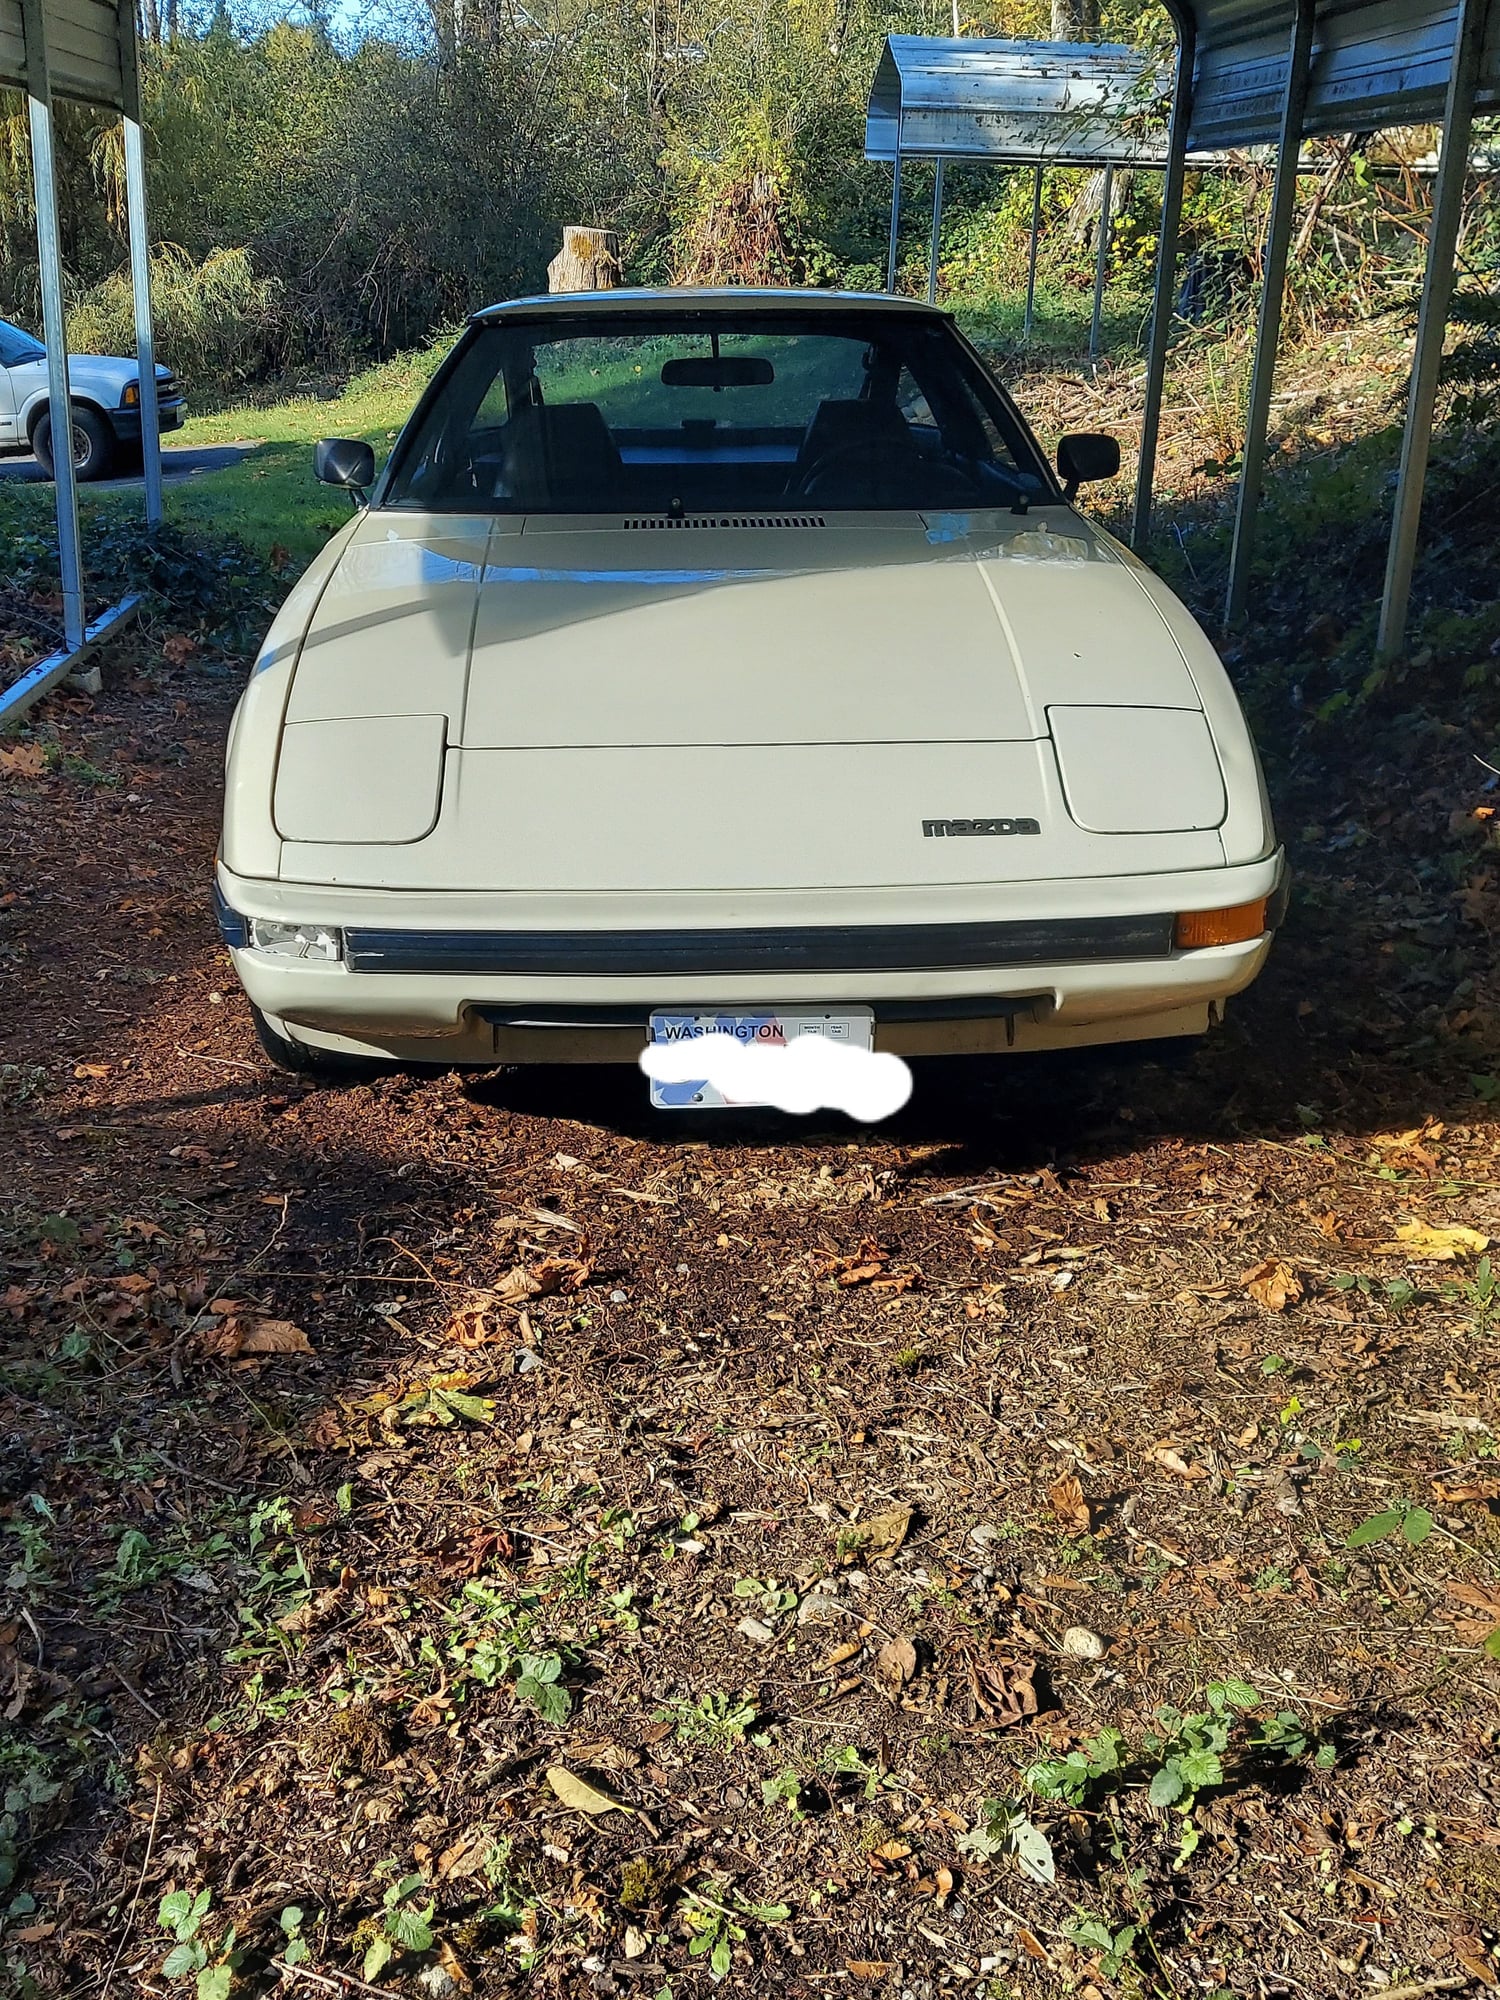 1982 Mazda RX-7 - 1982 rx-7 g - Used - VIN JM1FB3312C0610030 - 57,366 Miles - Other - 2WD - Manual - Coupe - White - Issaquah, WA 98027, United States